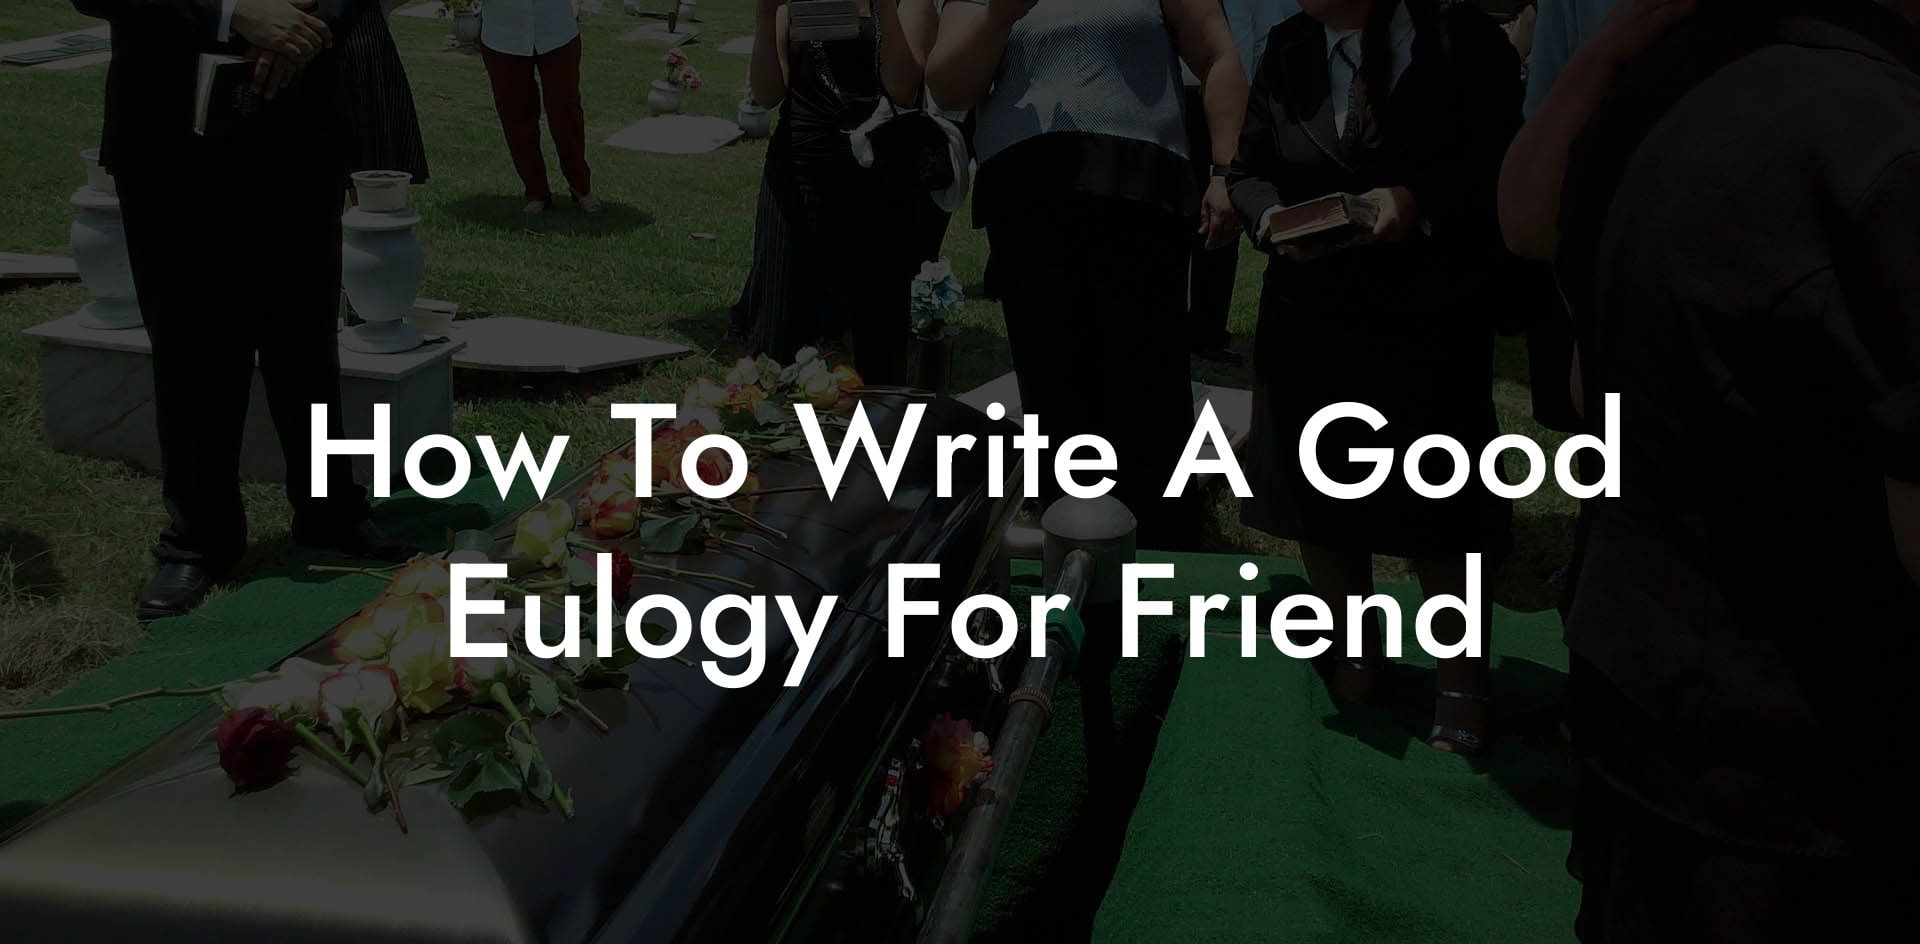 How To Write A Good Eulogy For Friend